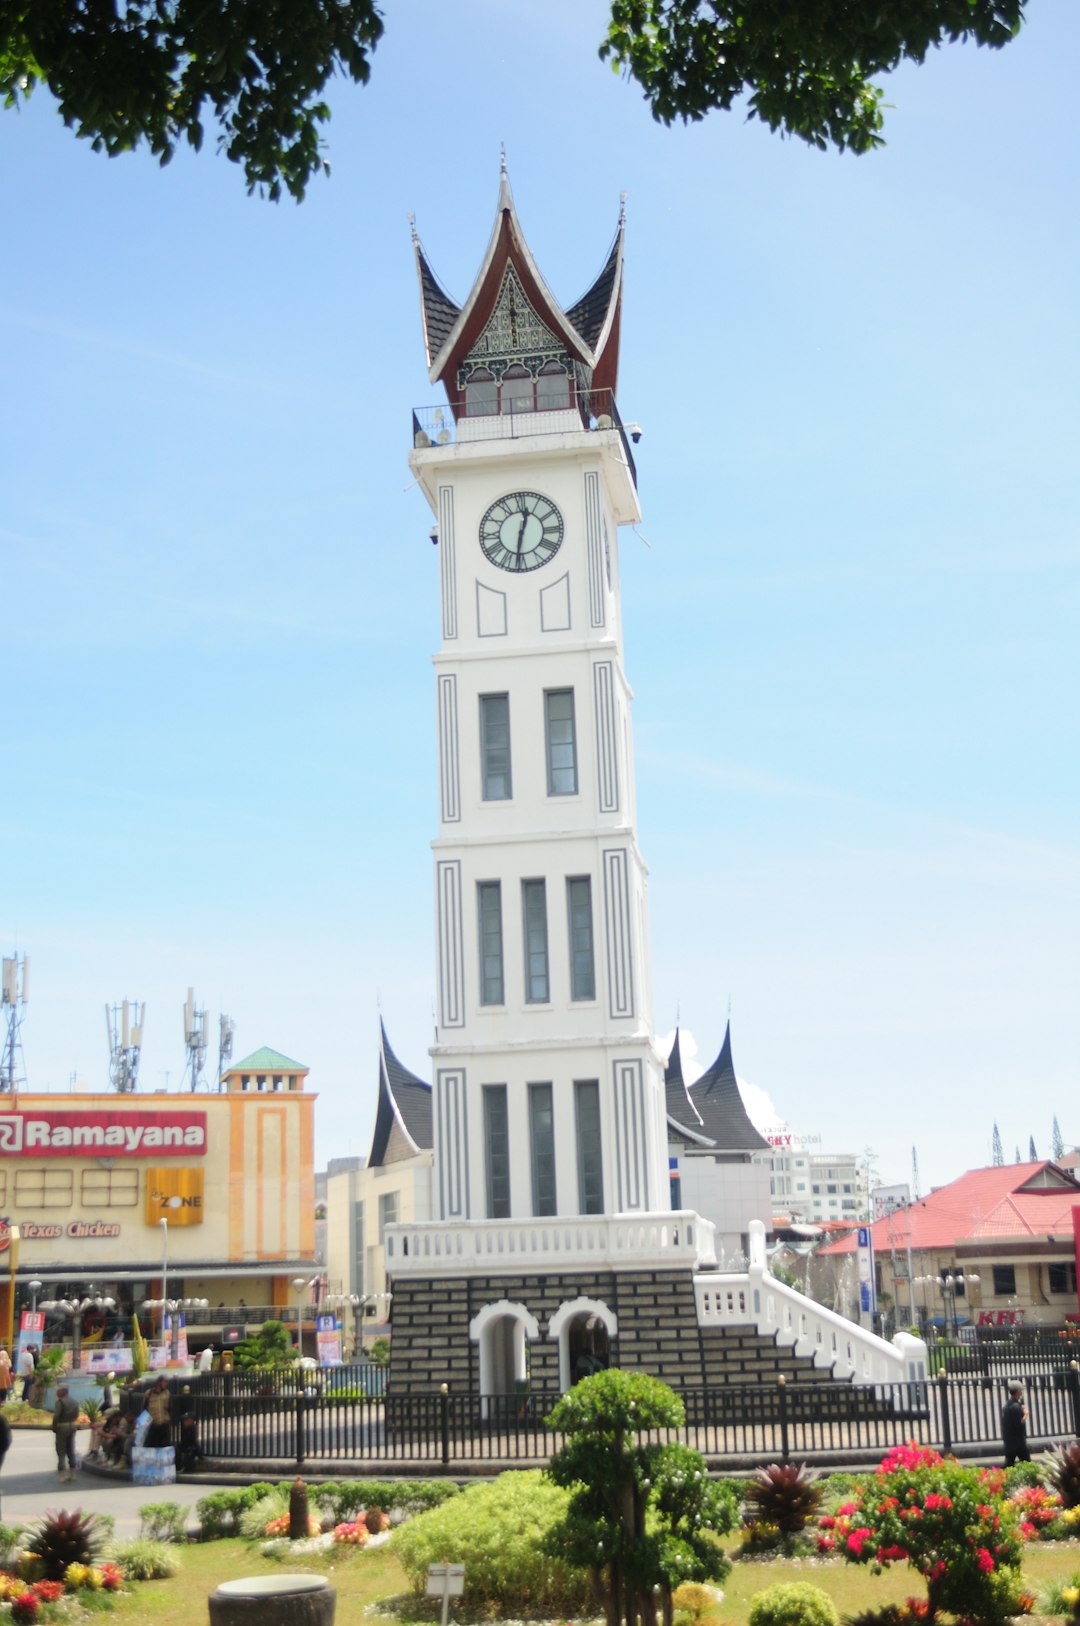 Travel Tips and Stories of Jam Gadang in Indonesia